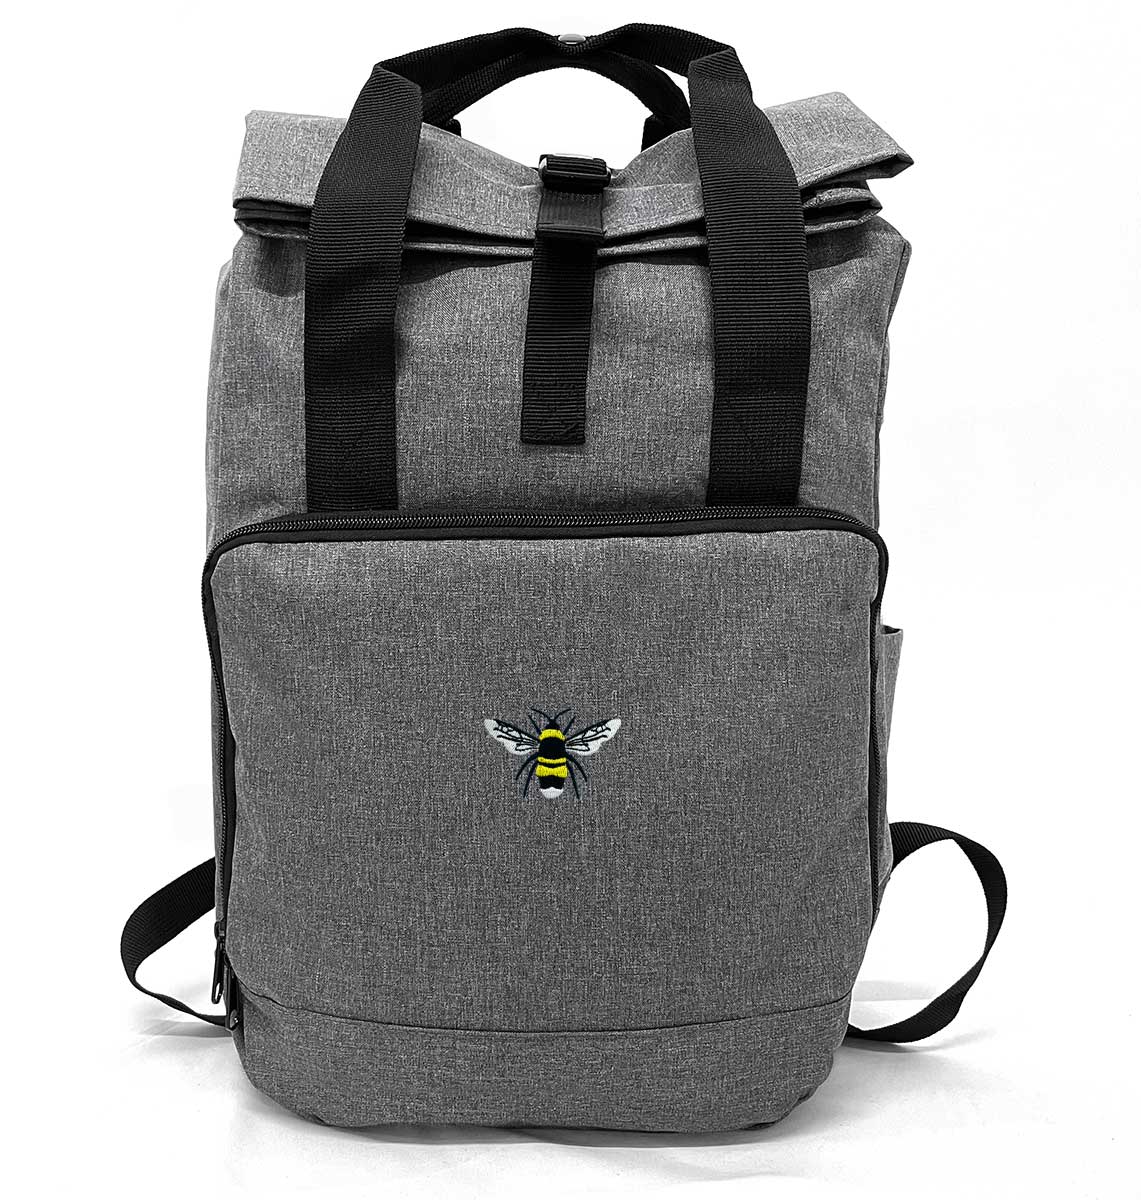 Bumble Bee Large Roll-top Laptop Recycled Backpack - Blue Panda